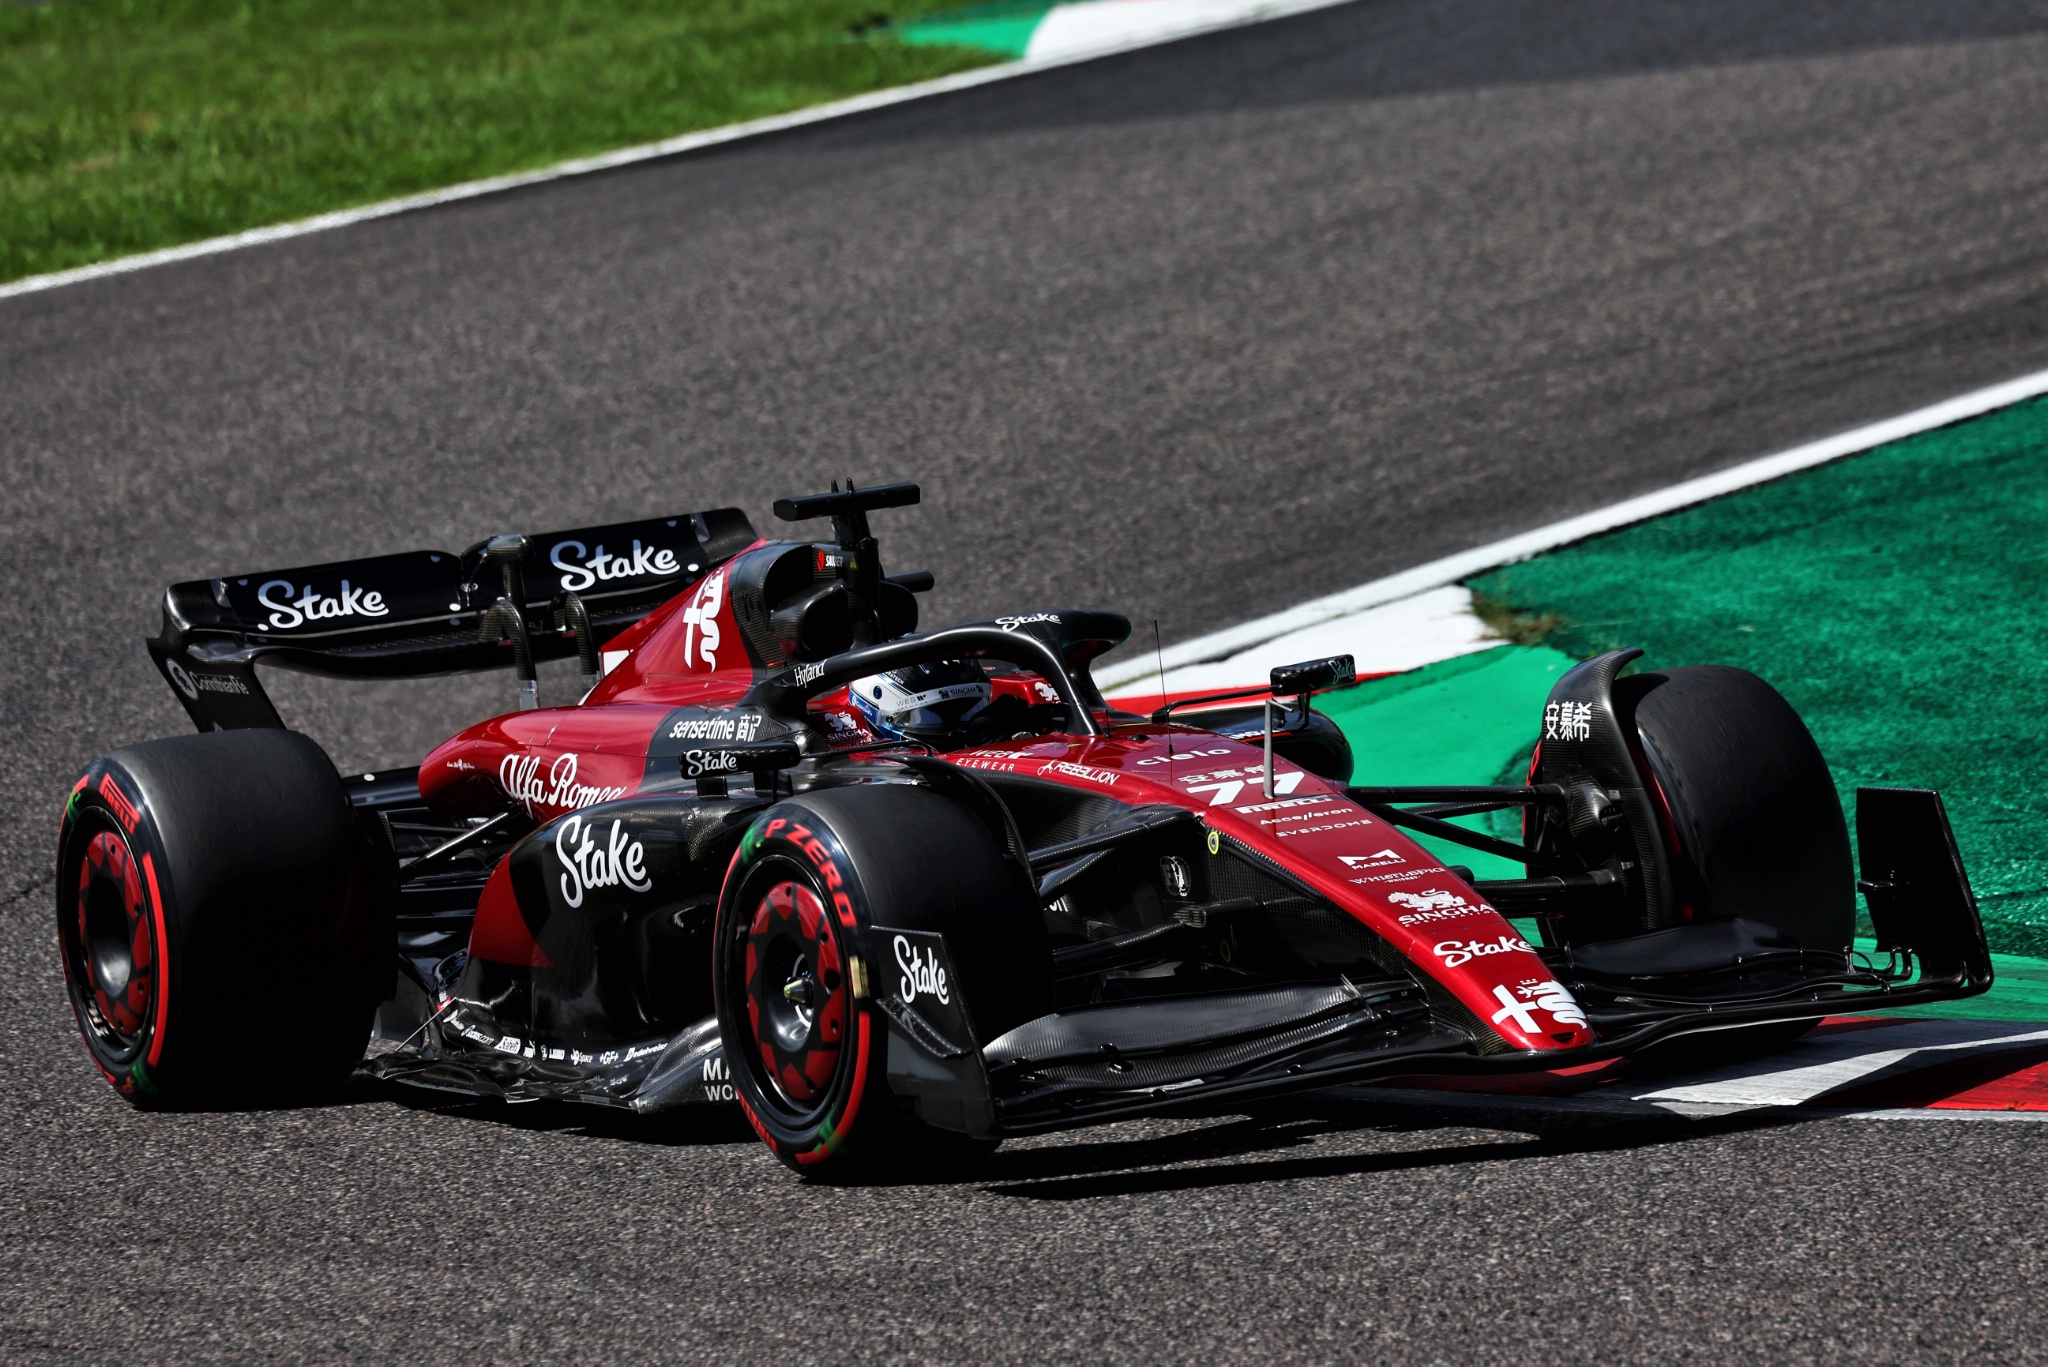 F1 News: Sauber Gives Branding Update For 2024 As Alfa Romeo Exit Looms -  Based On The Heritage - F1 Briefings: Formula 1 News, Rumors, Standings  and More